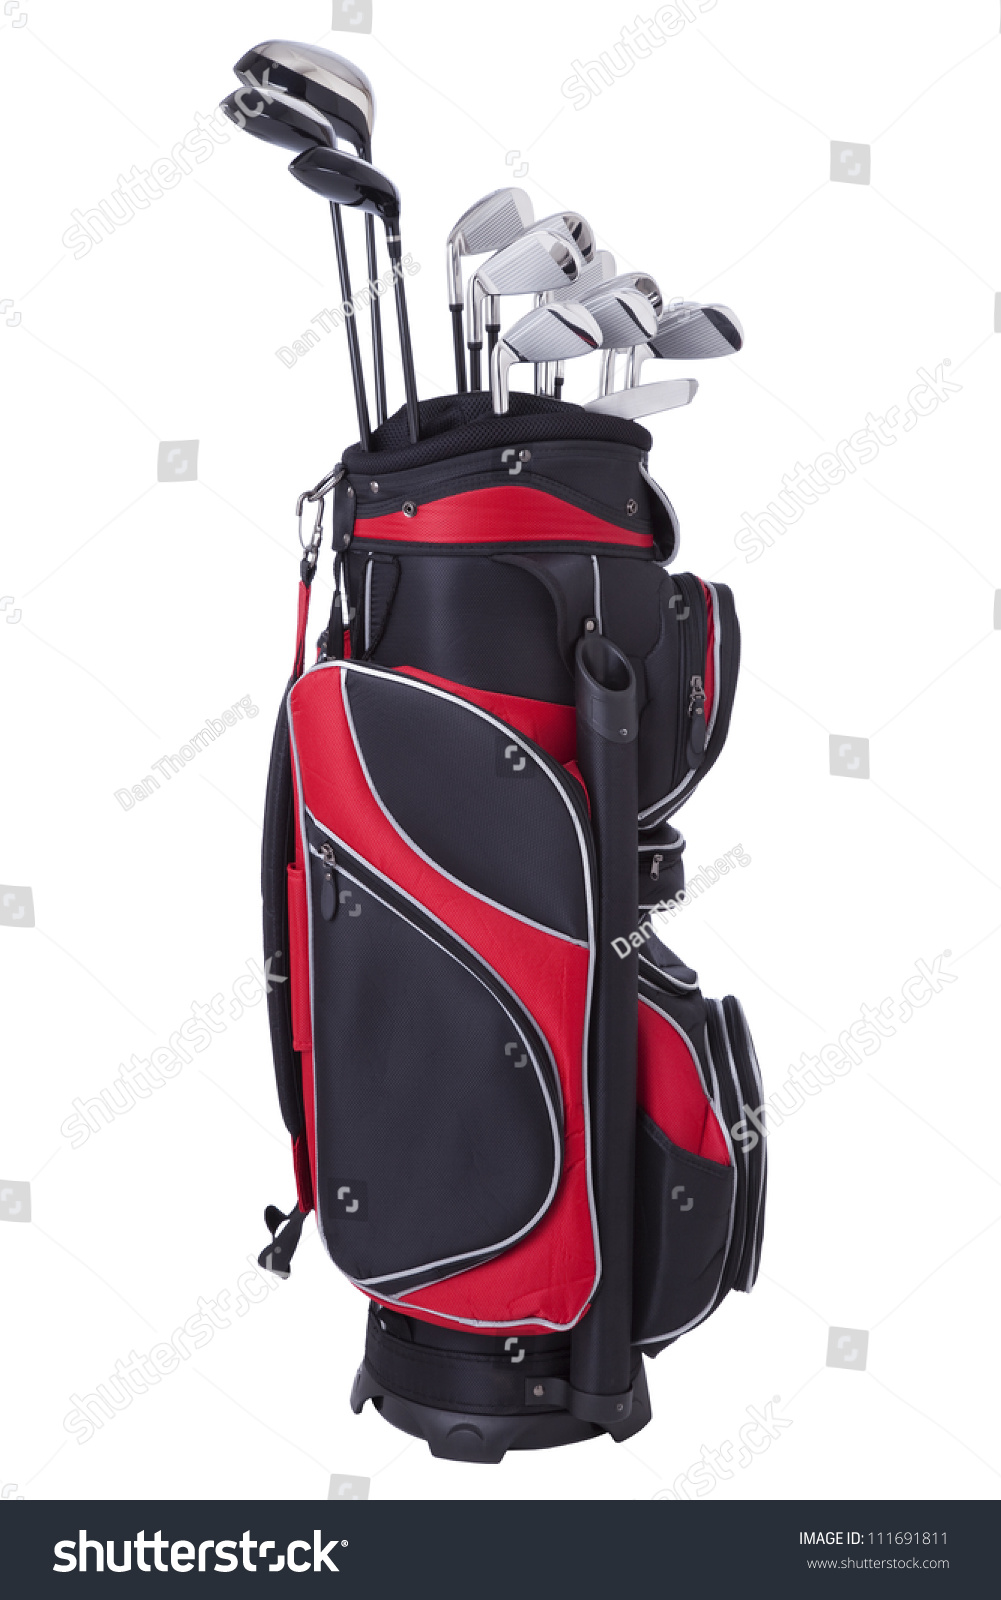 Golf clubs in red and black bag isolated on white #111691811